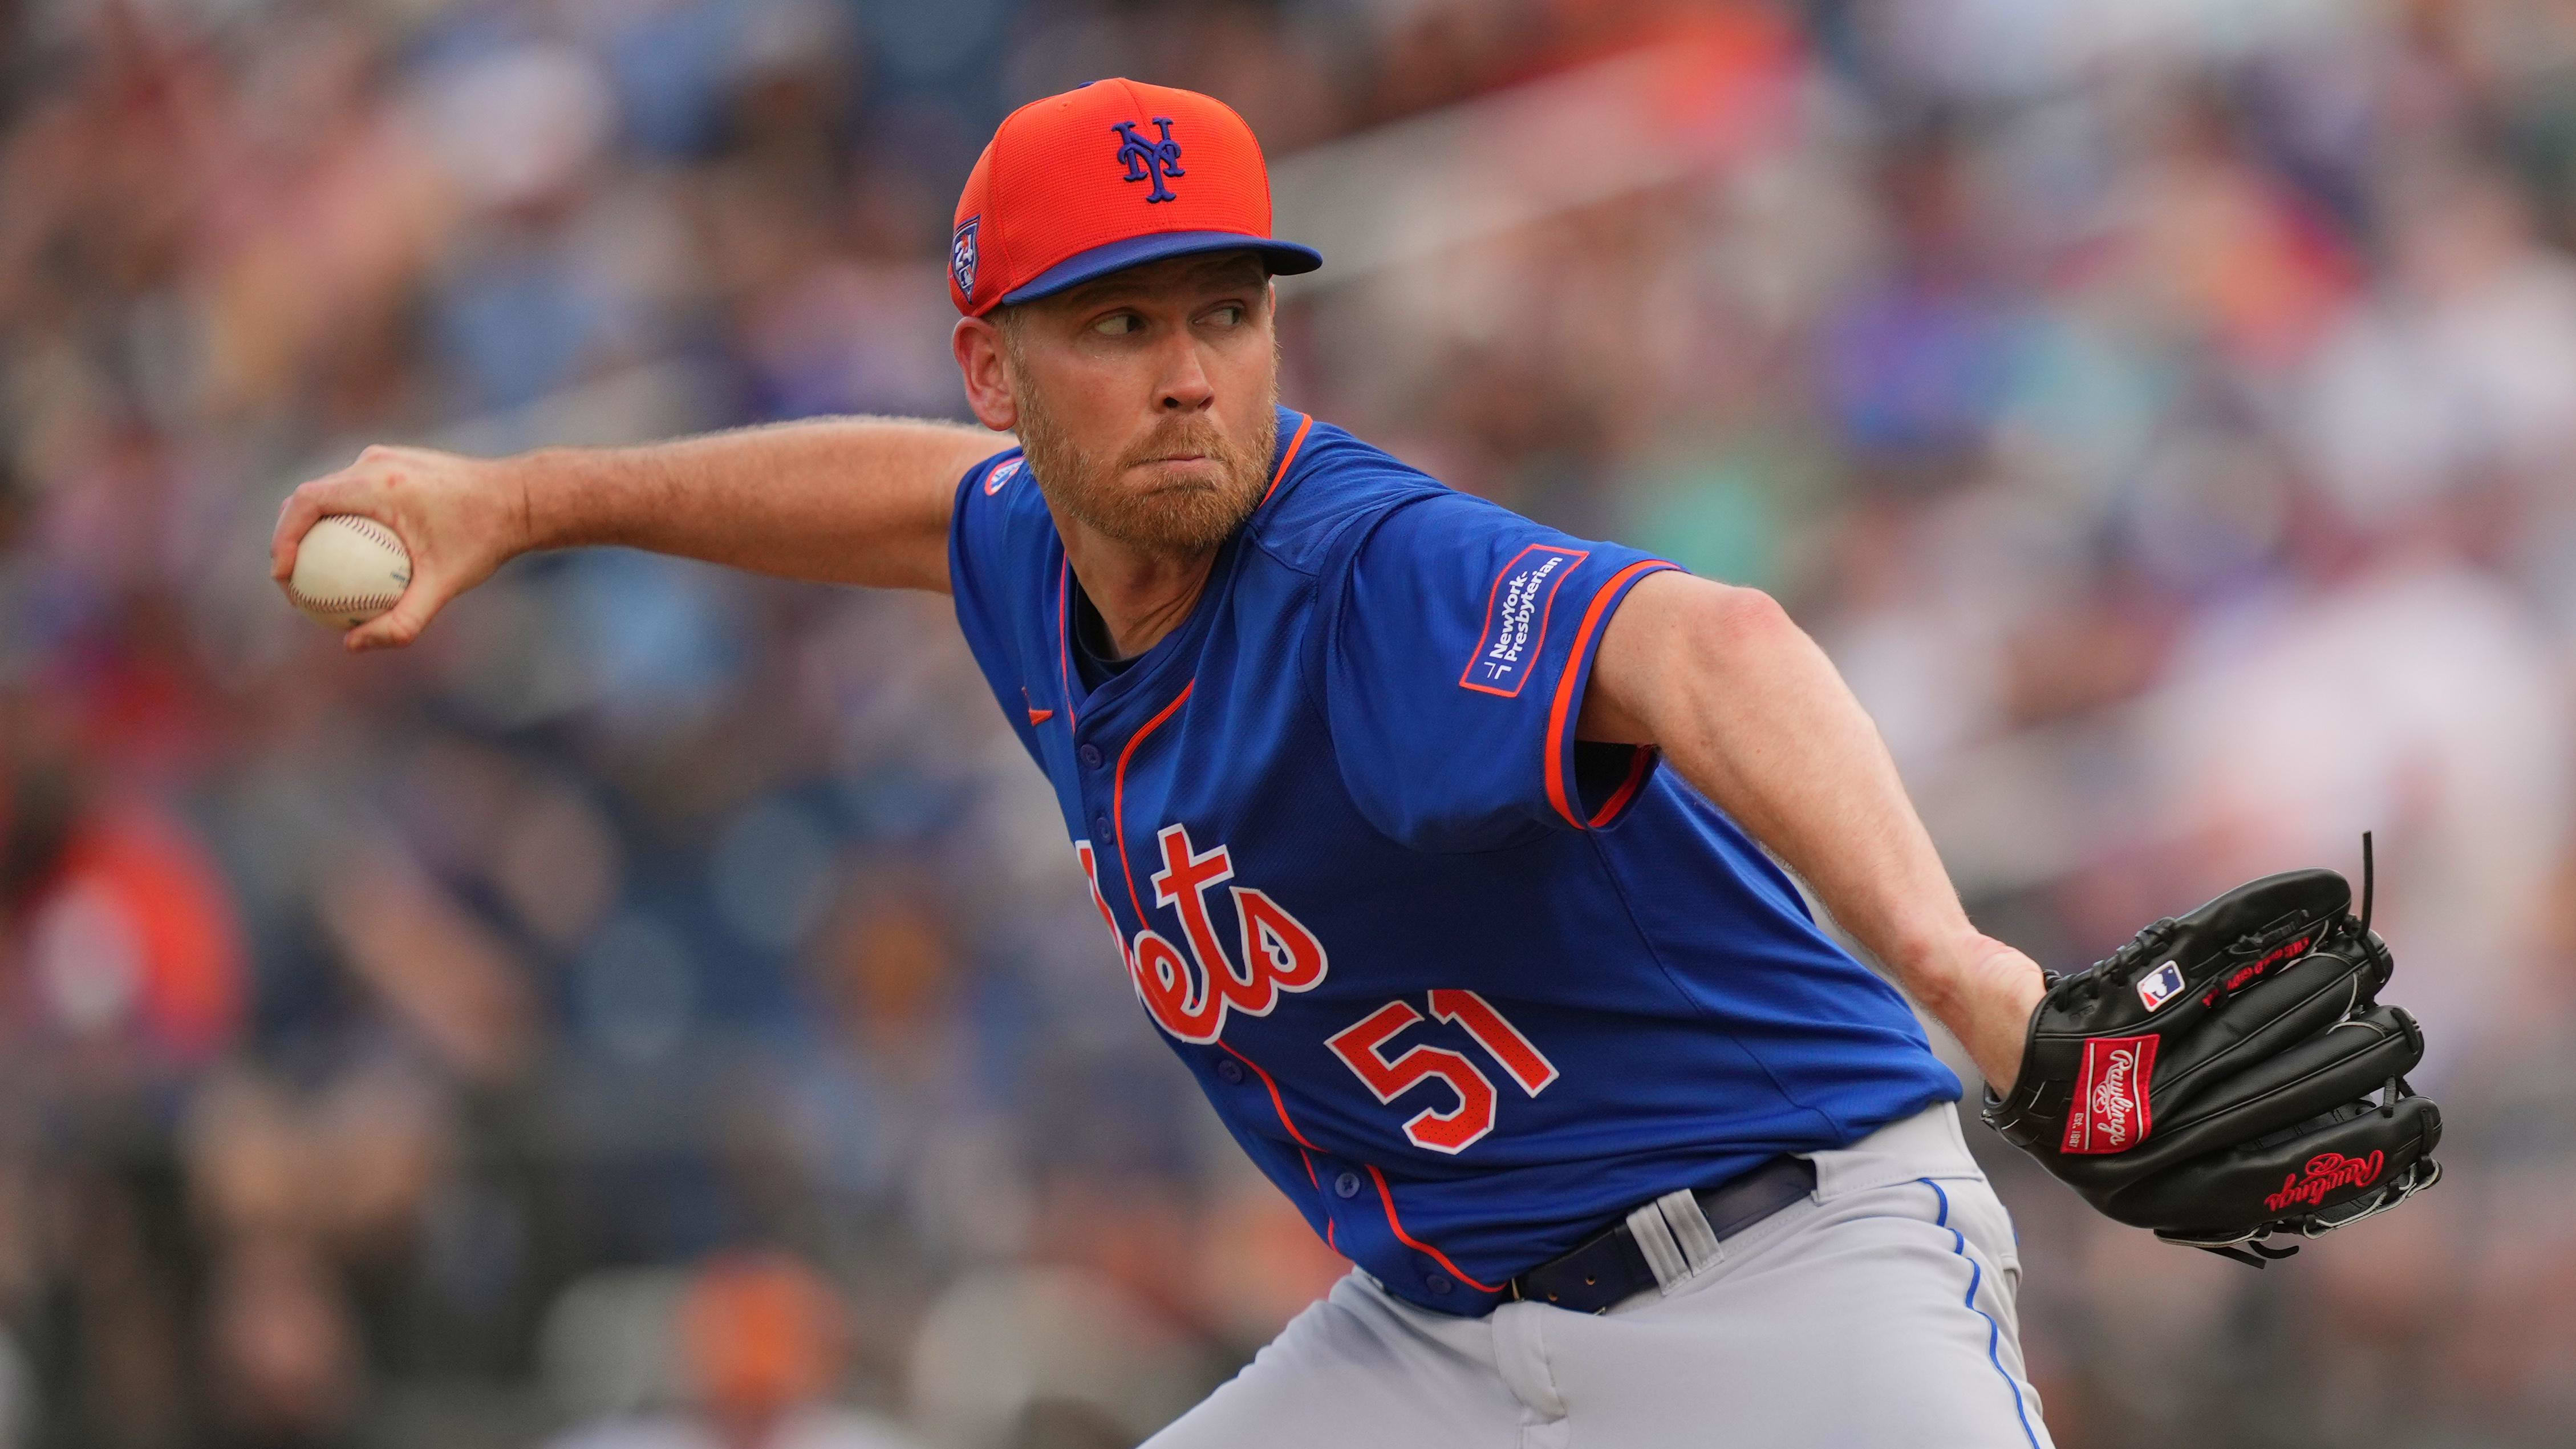 New York Mets relief pitcher Michael Tonkin was designated for assignment on Friday